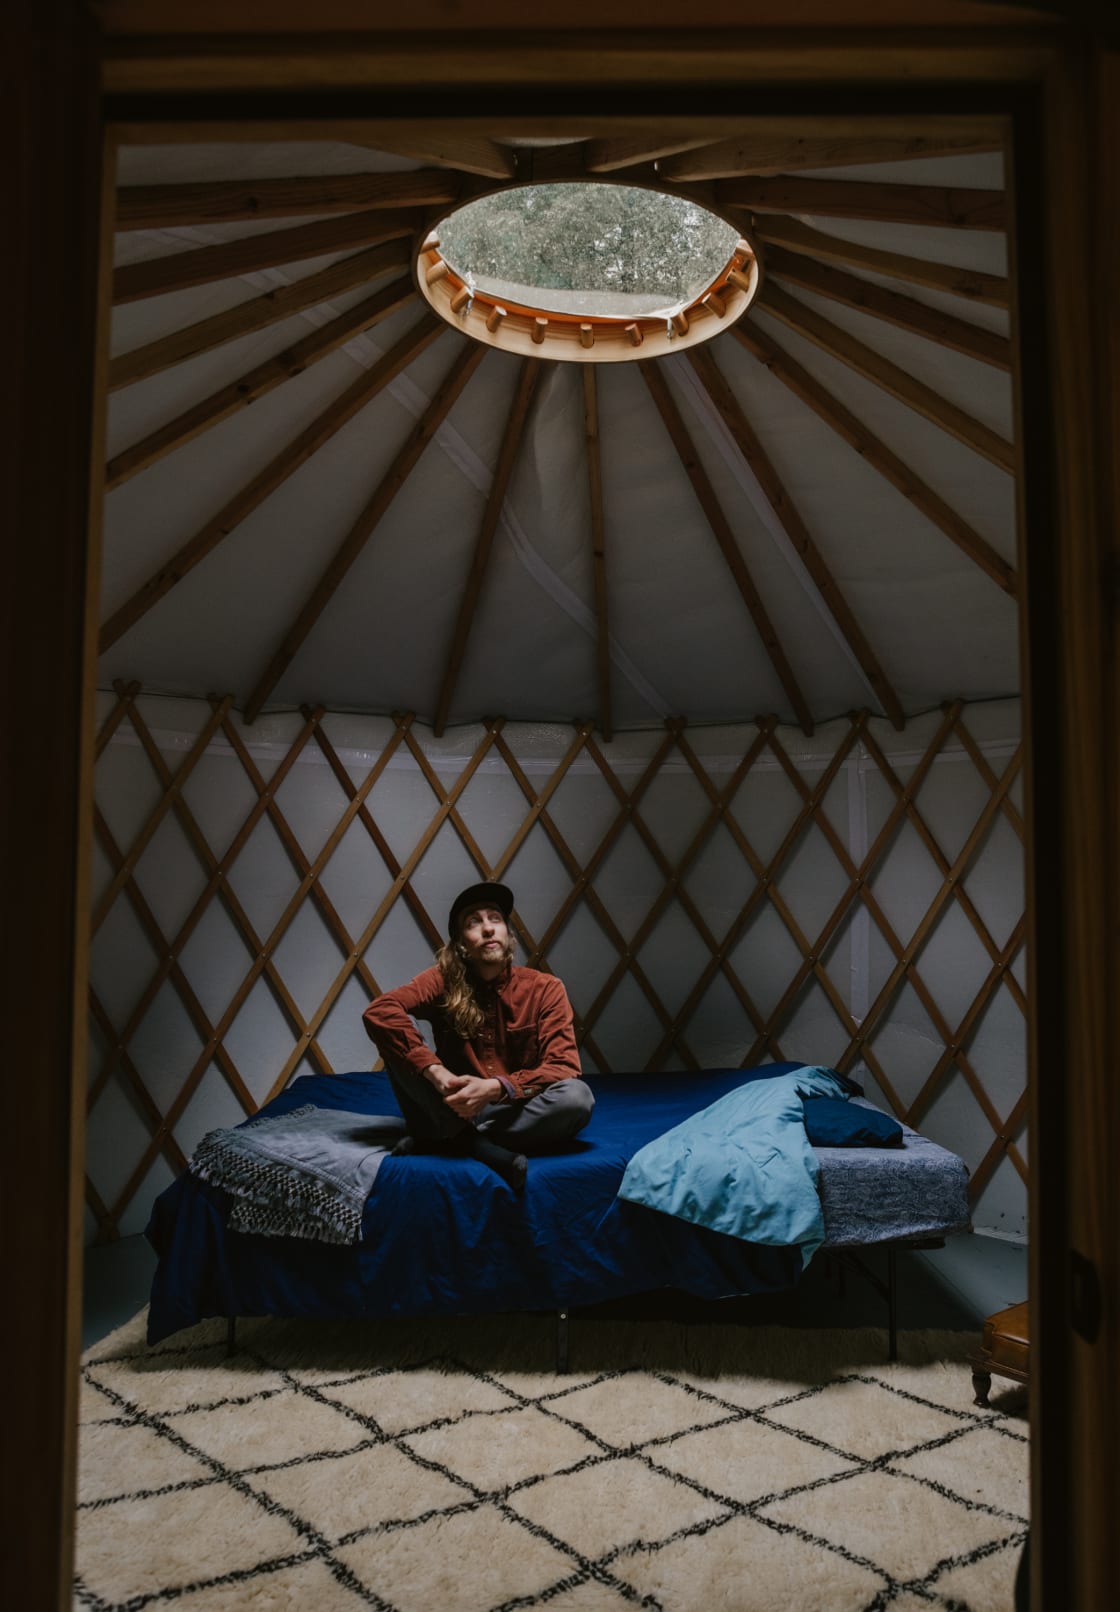 There's a spacious queen Tempurpedic bed in this yurt, be sure to bring your own bedding! 